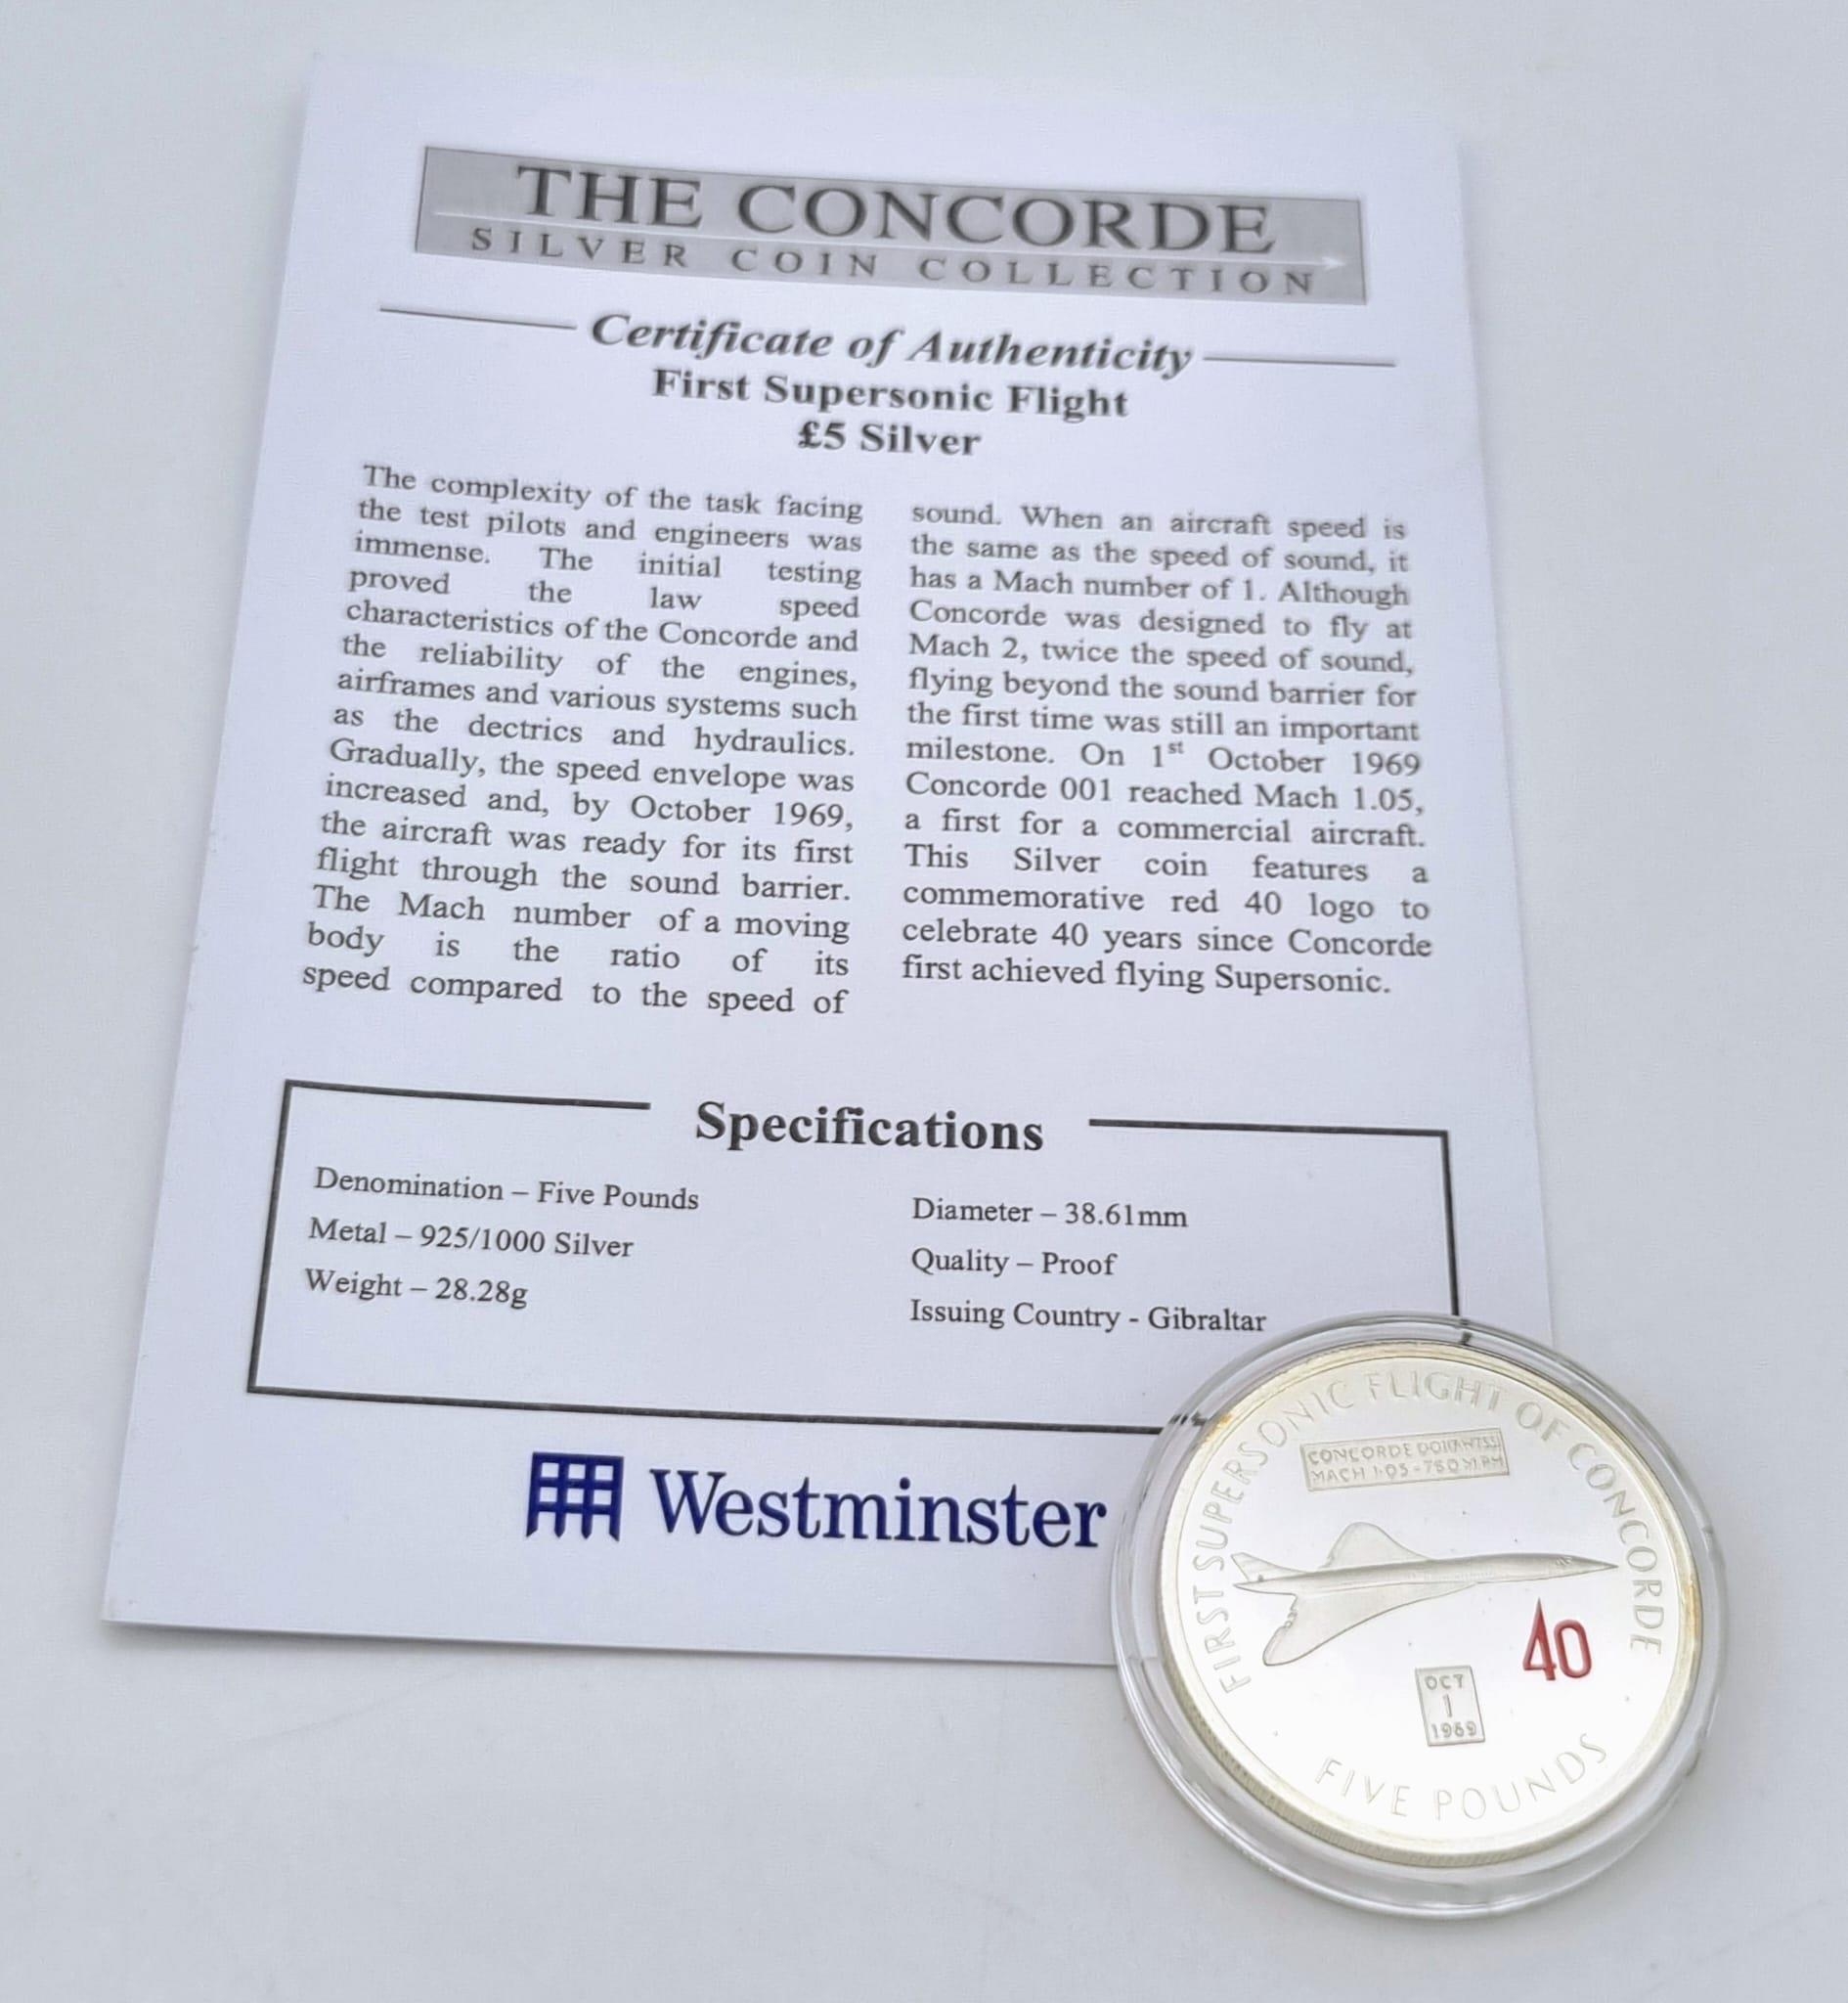 First Supersonic Flight of the Concorde Sterling Silver £5 Coin Mint Condition in Capsule with Certi - Image 3 of 3